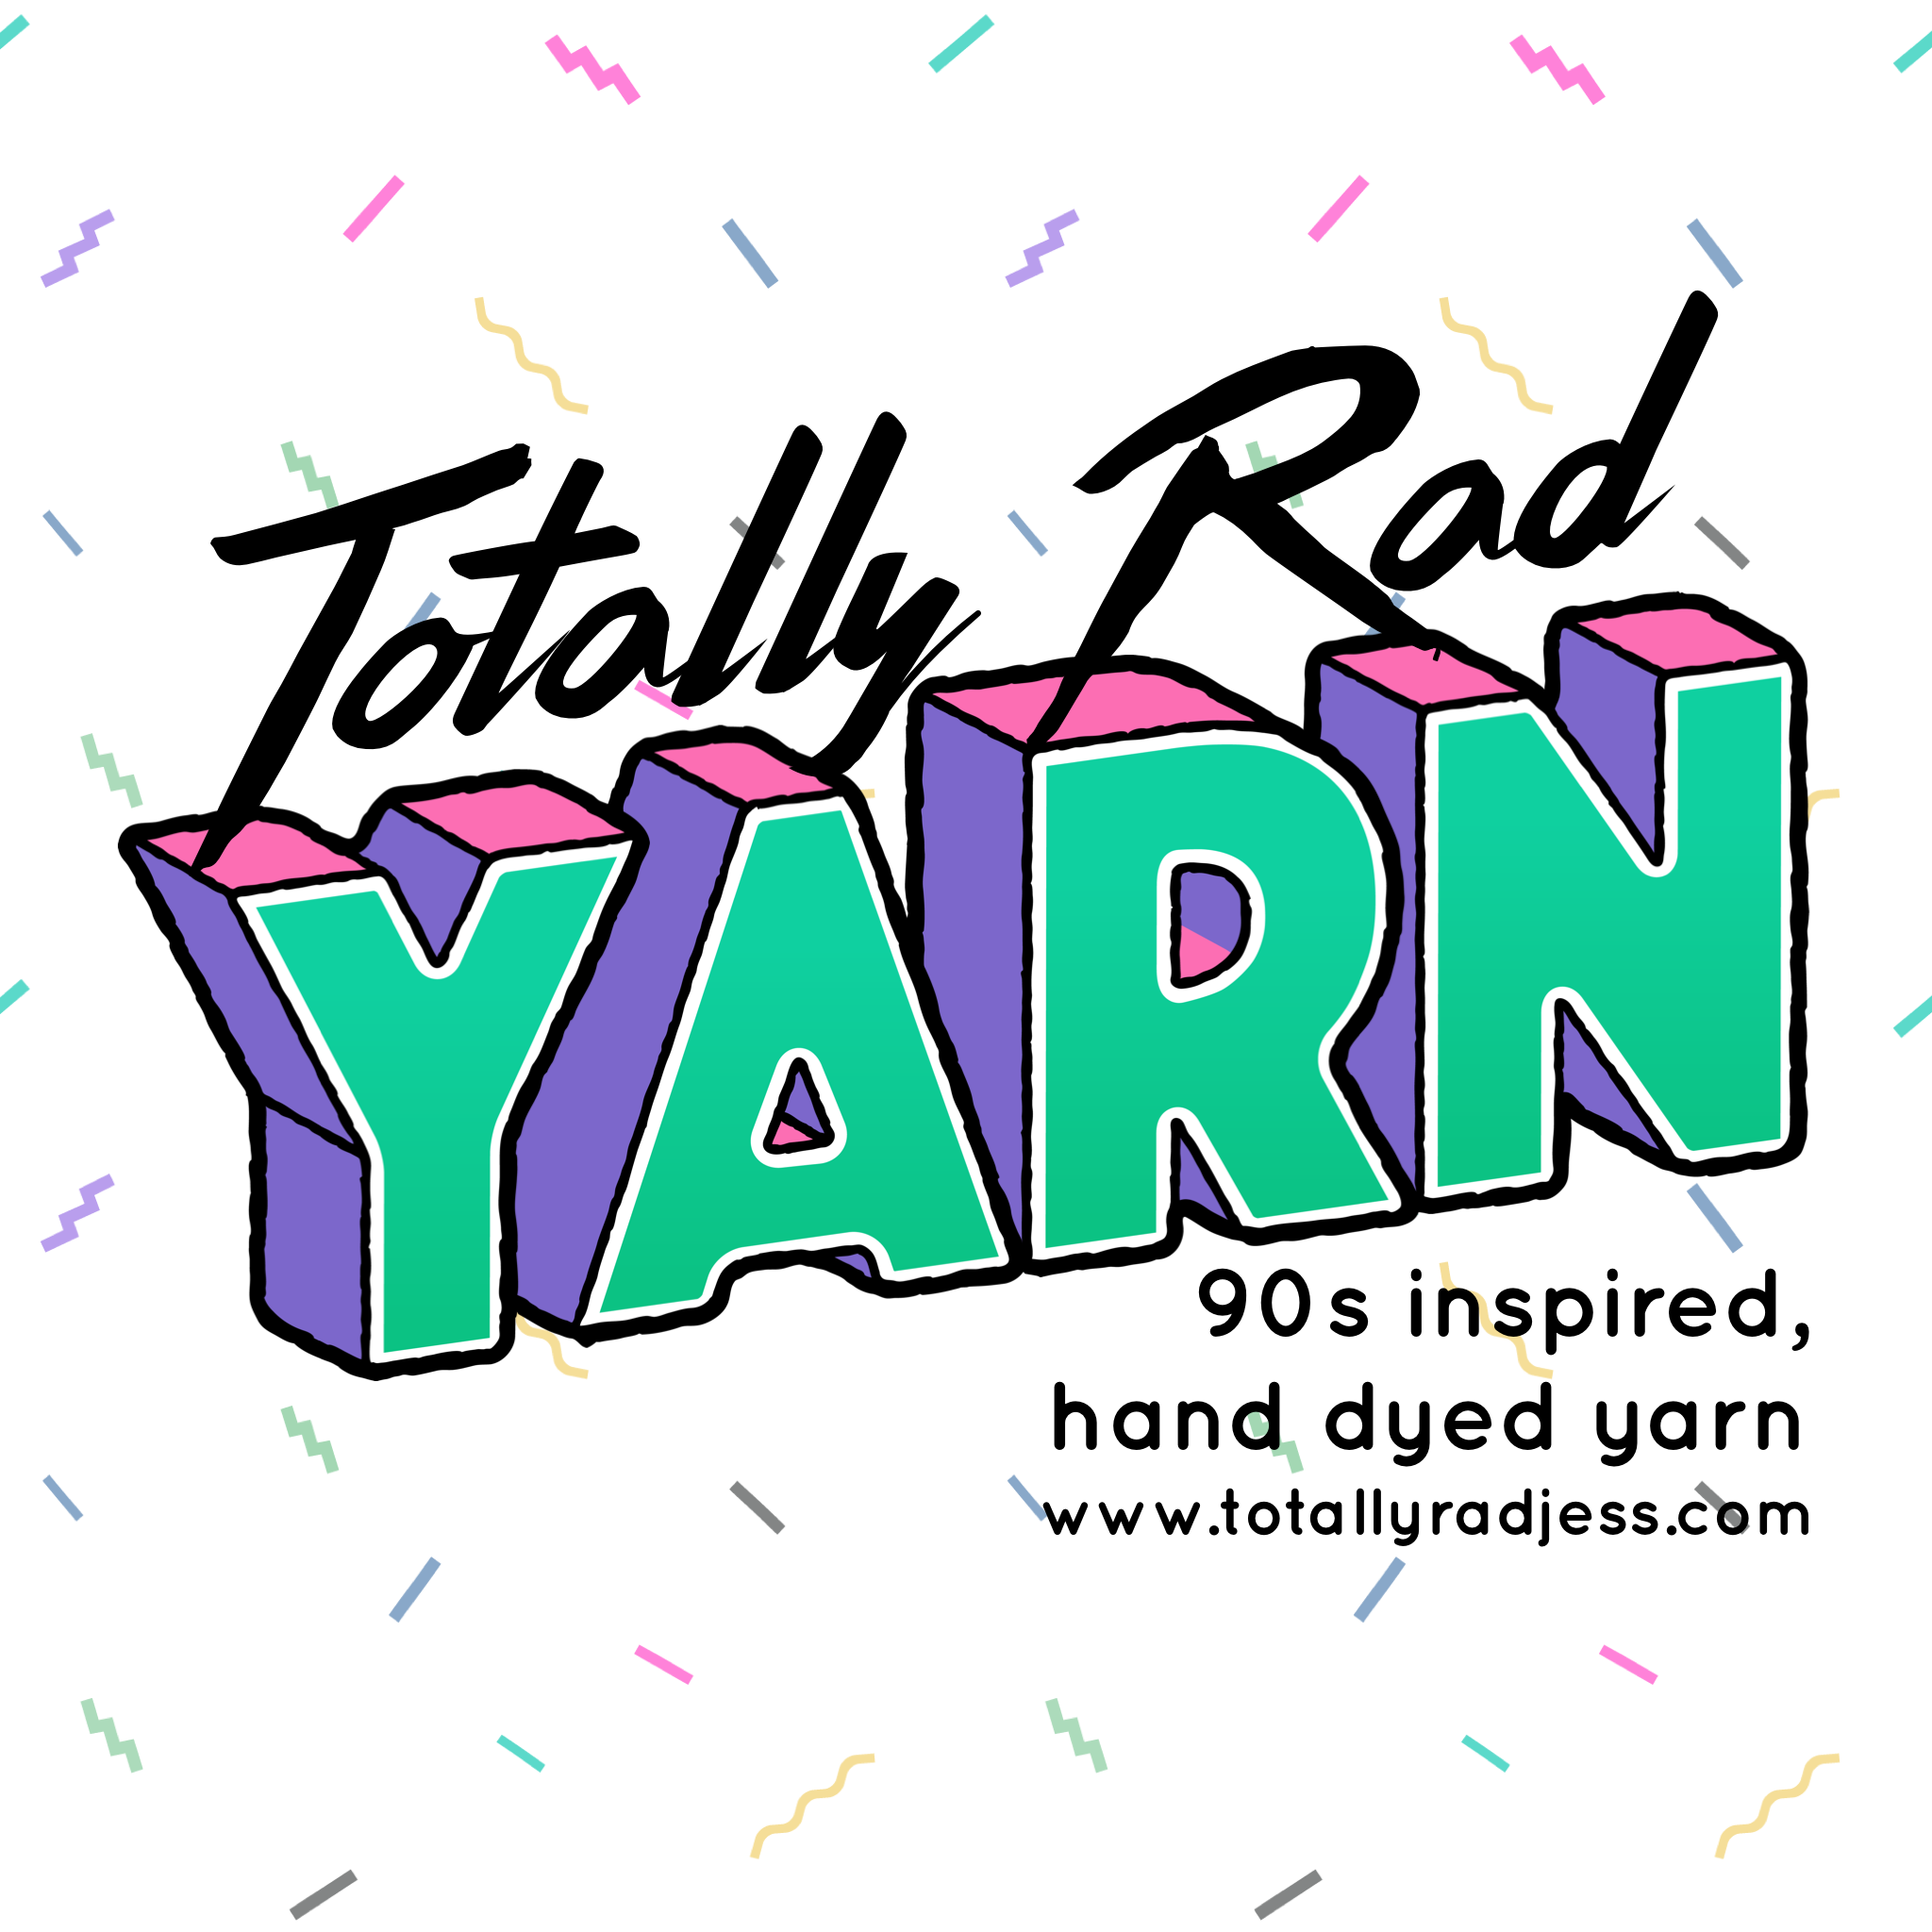 The words "Totally Rad Yarn" with the words "90s inspired, hand dyed yarn" and "www.totallyradjess.com" below it over a 90s style confetti background.